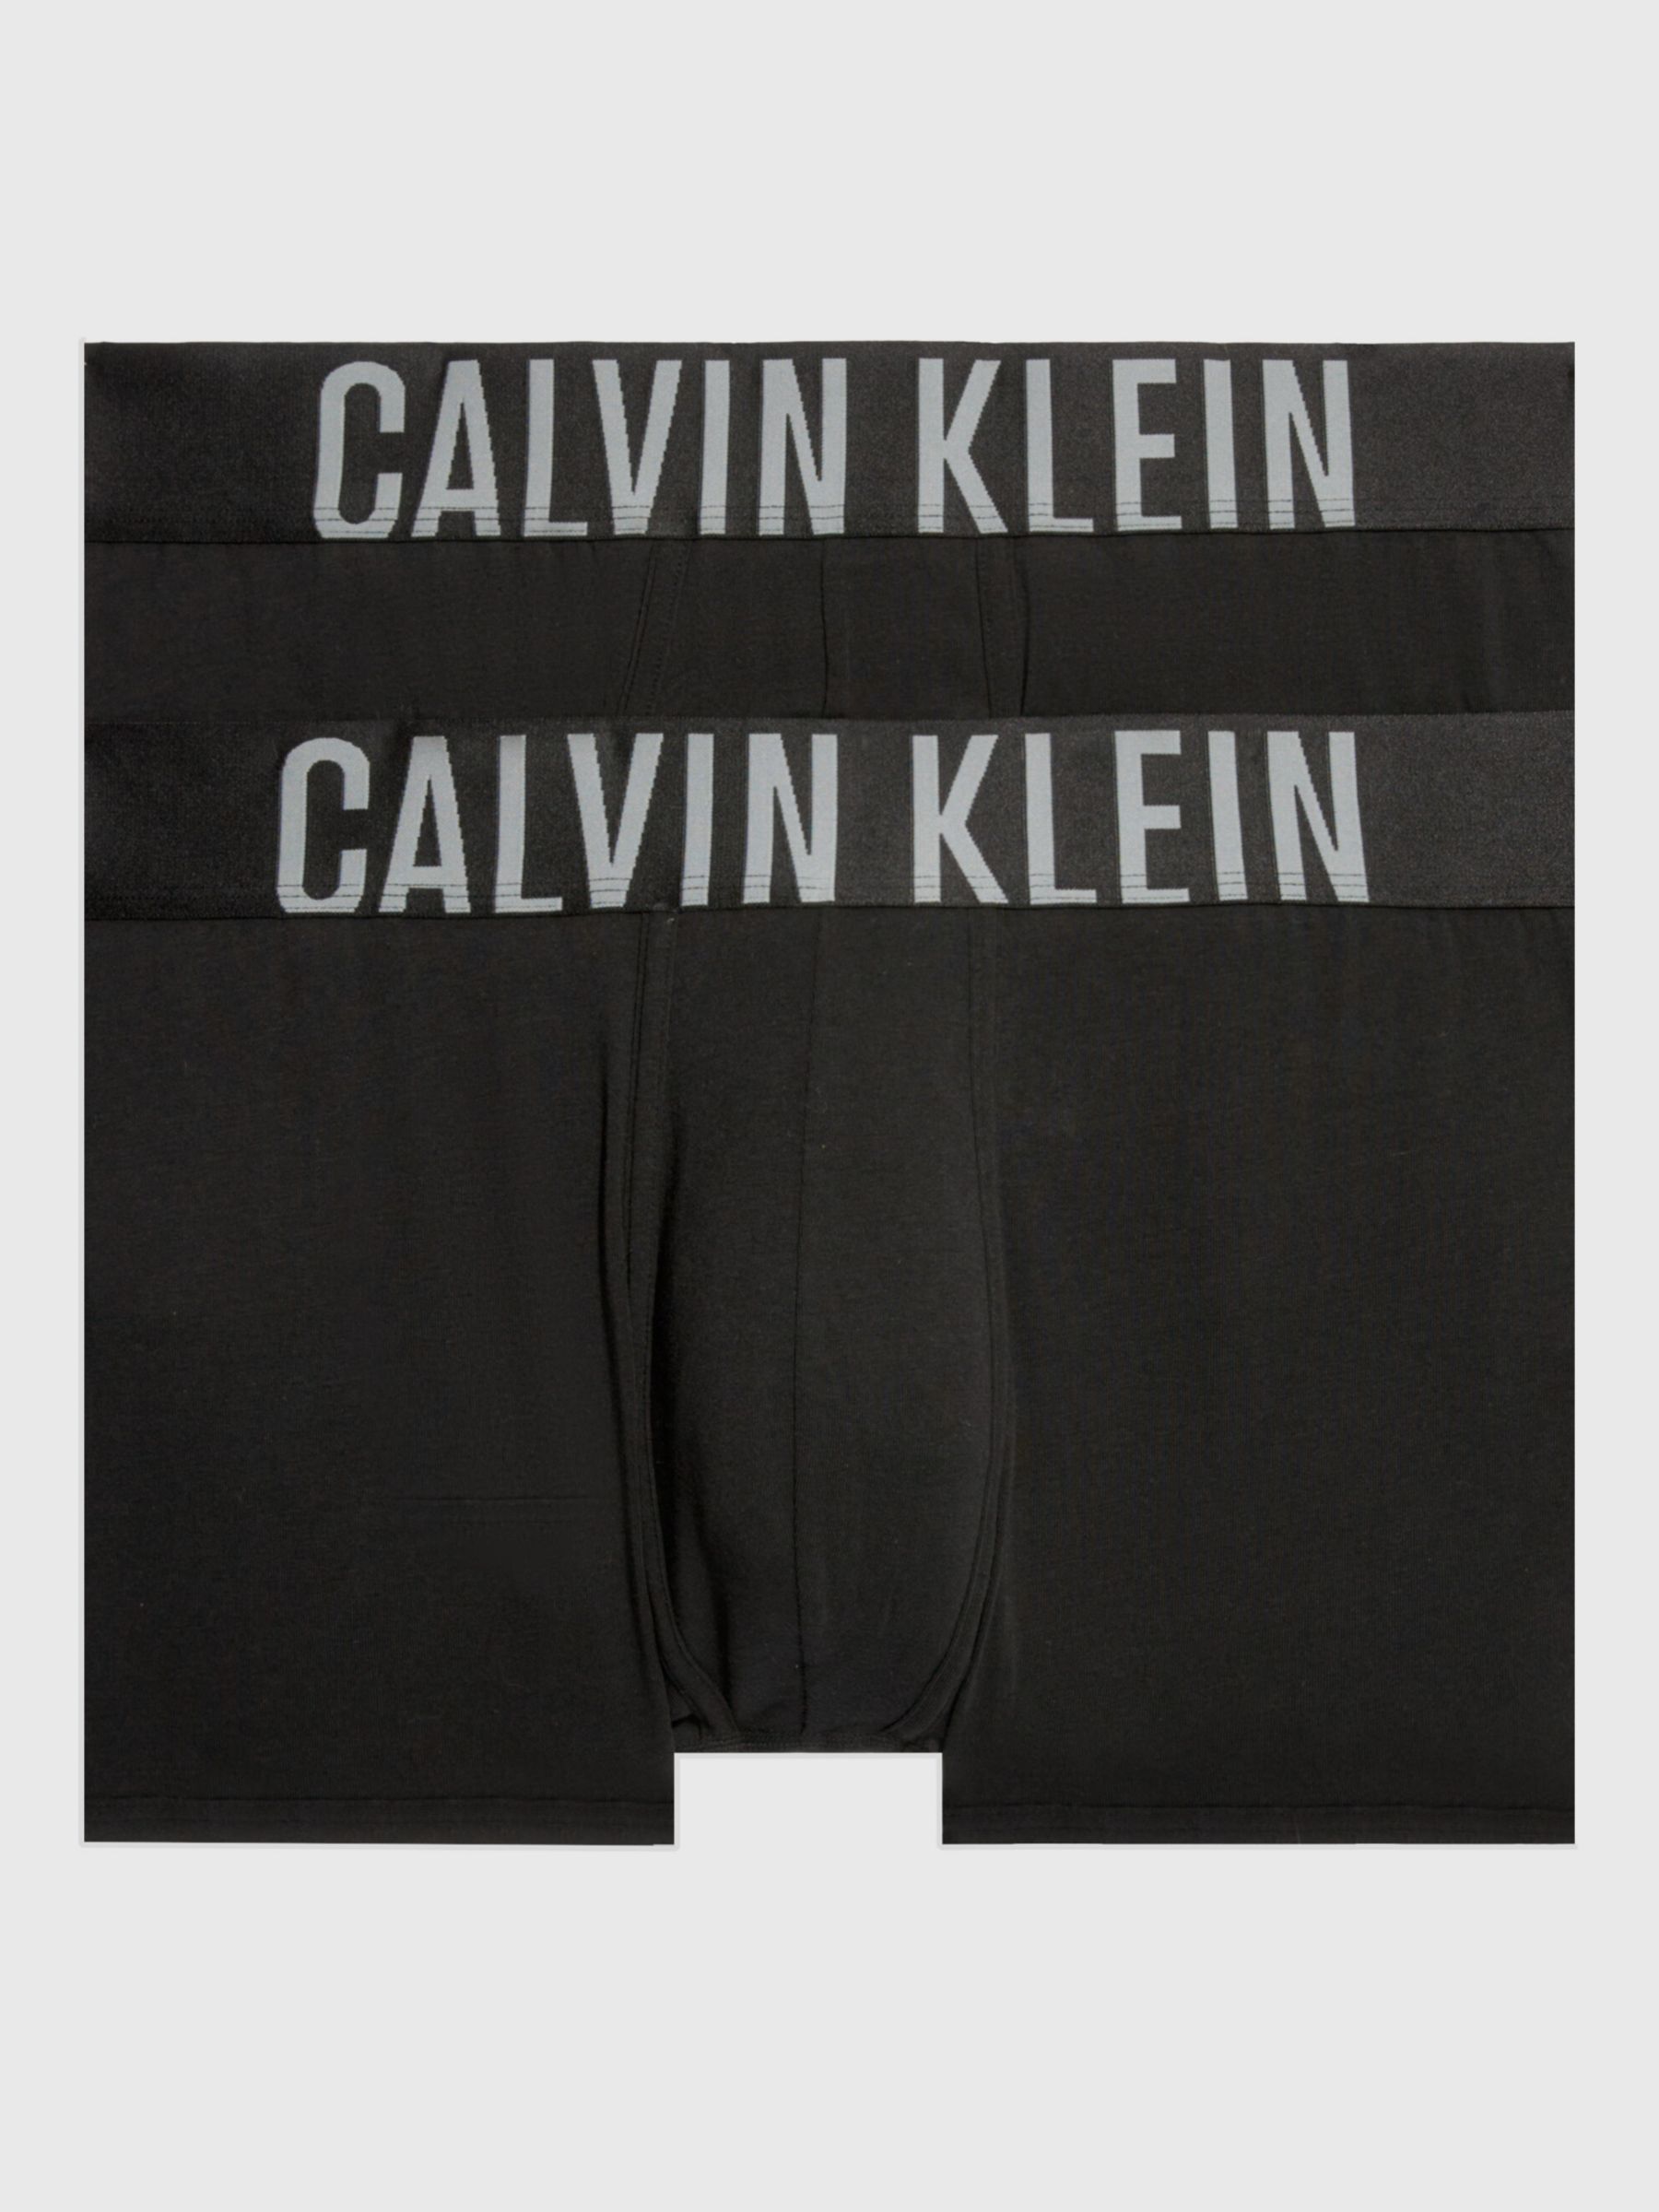 CALVIN KLEIN BRAND NEW SET OF TWO THONGS SIZE S in 2023